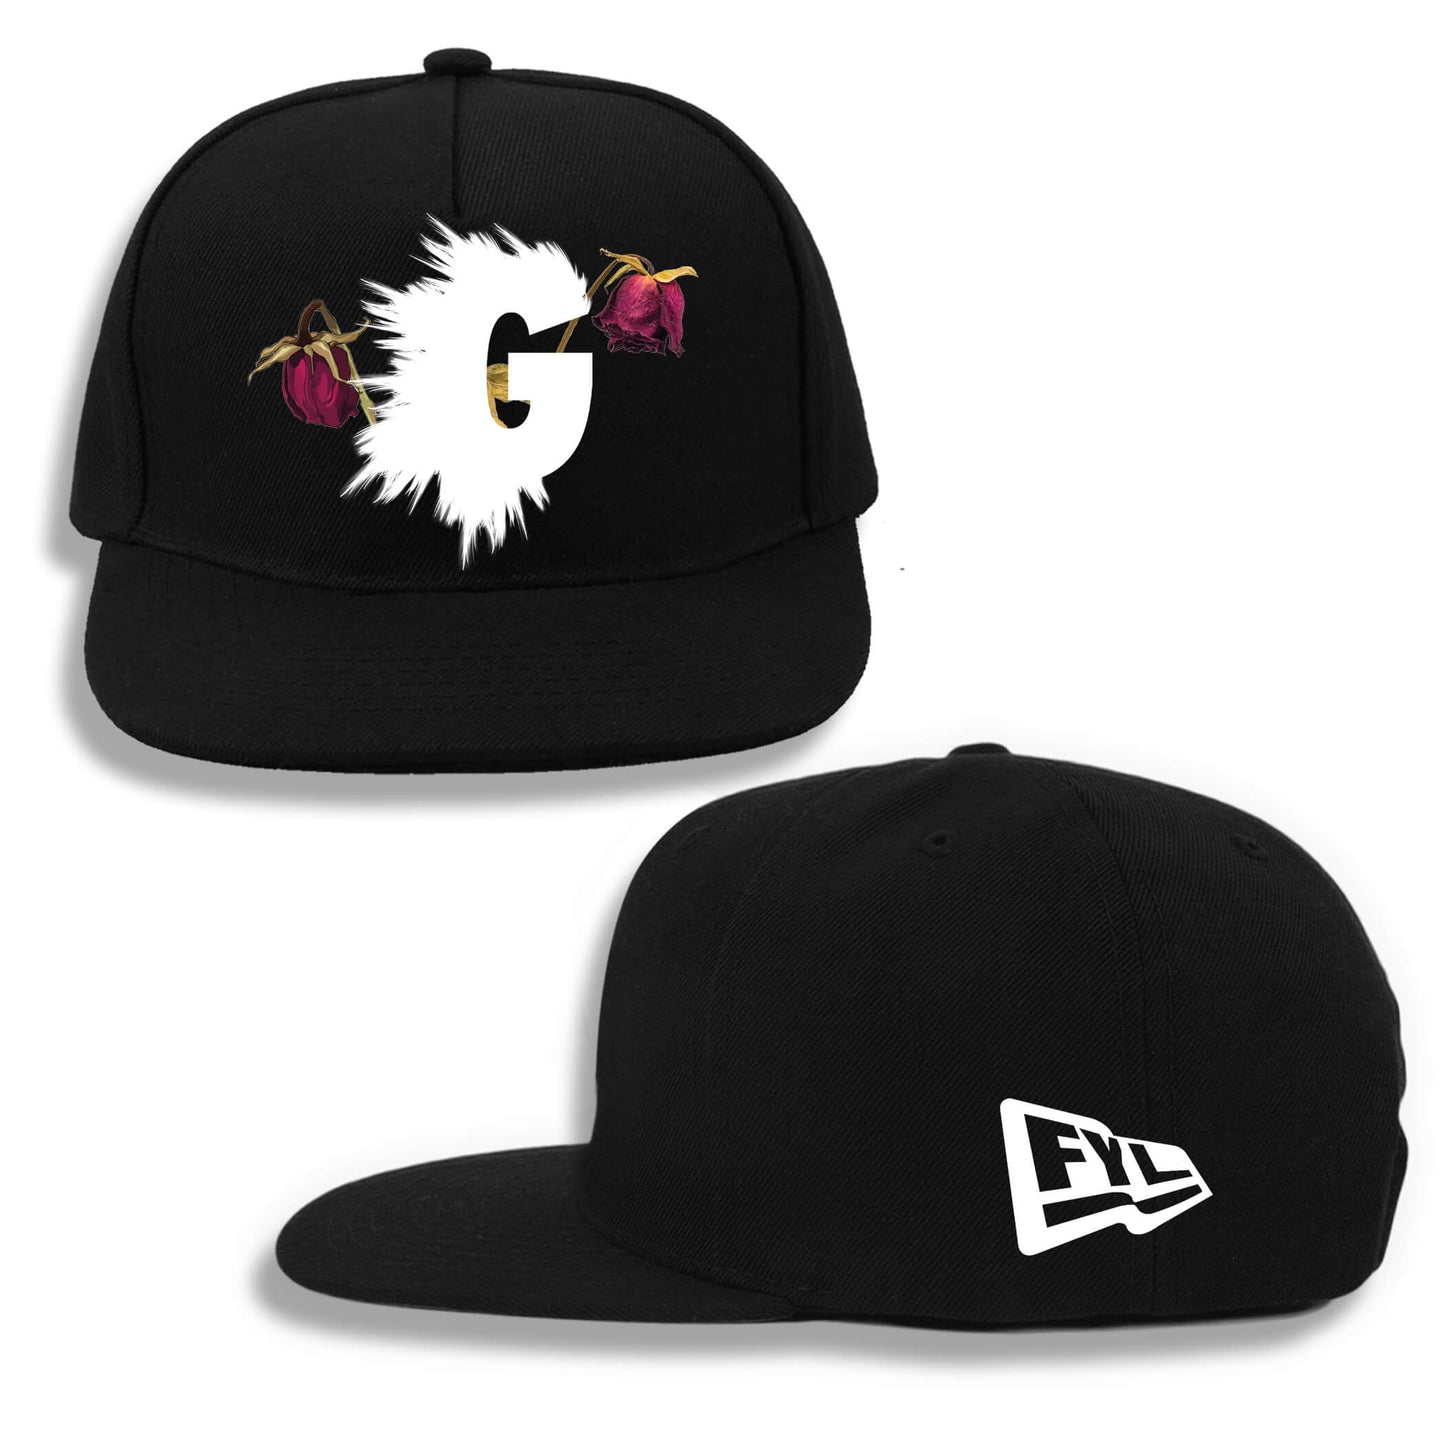 WAR OF THE ROSES (DEAD OR ALIVE) SNAPBACK